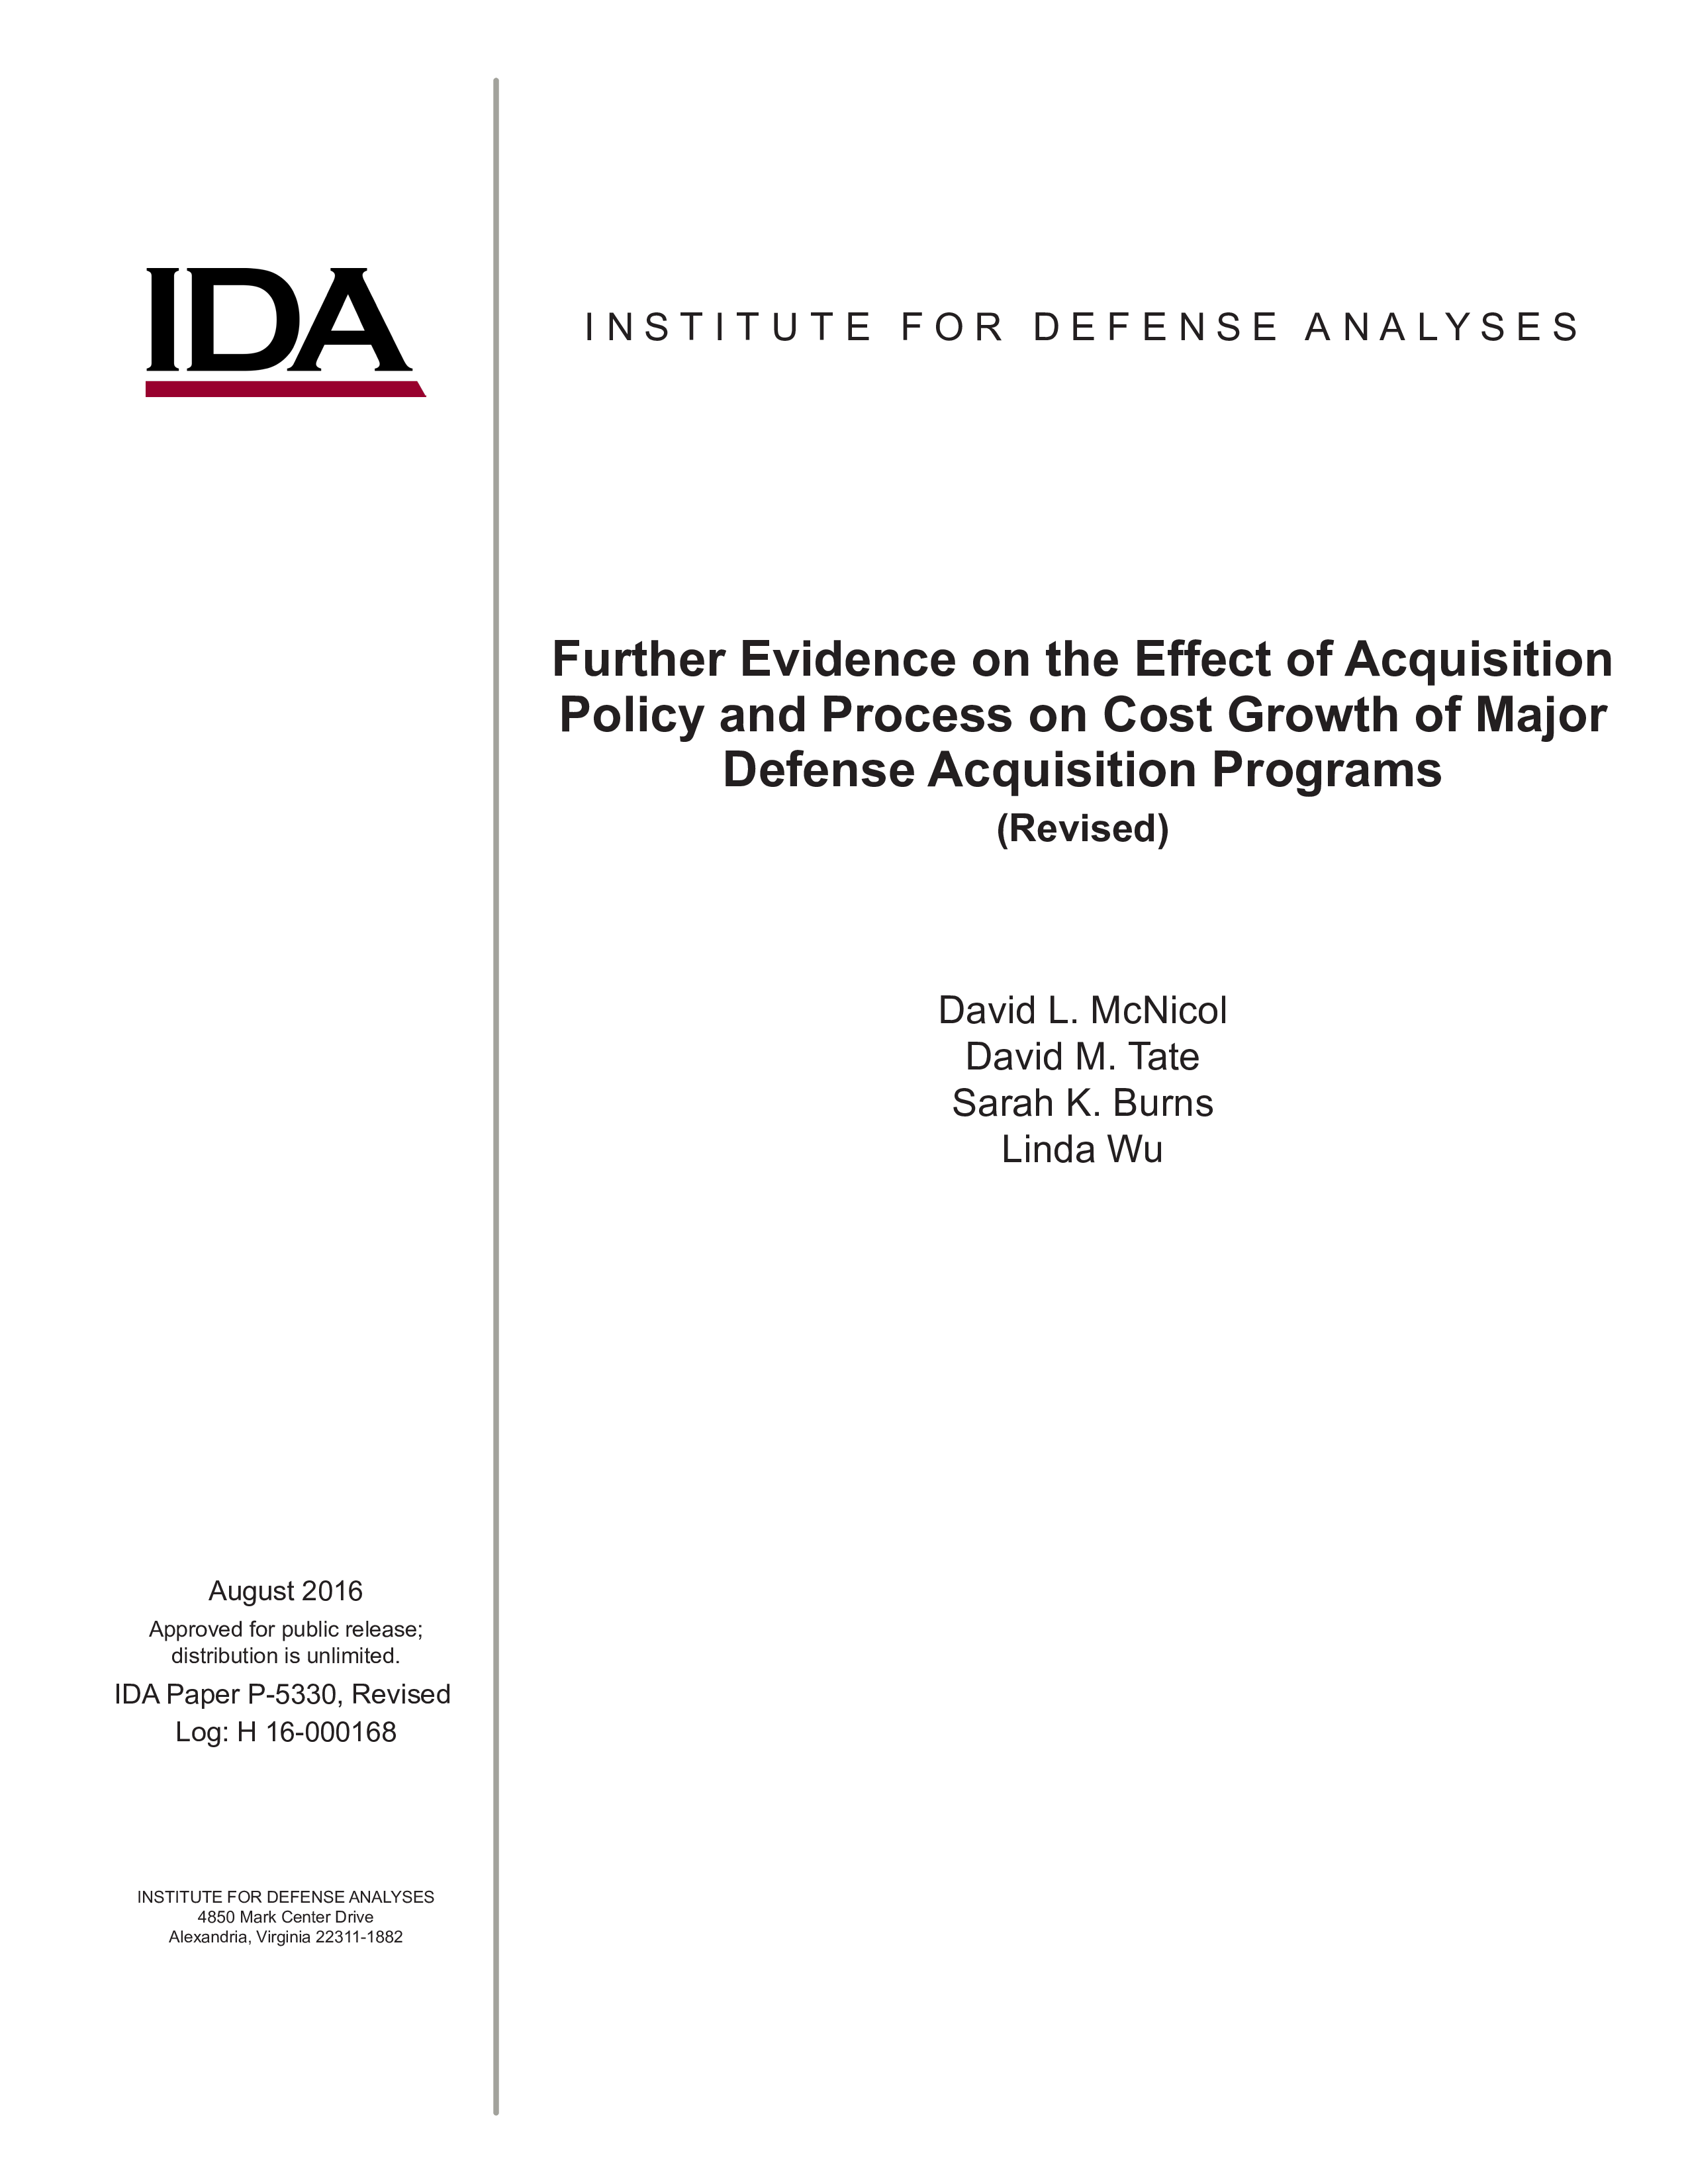 Further Evidence on the Effect of Acquisition Policy and Process on the Cost Growth of Major Defense Acquisition Programs (revised)